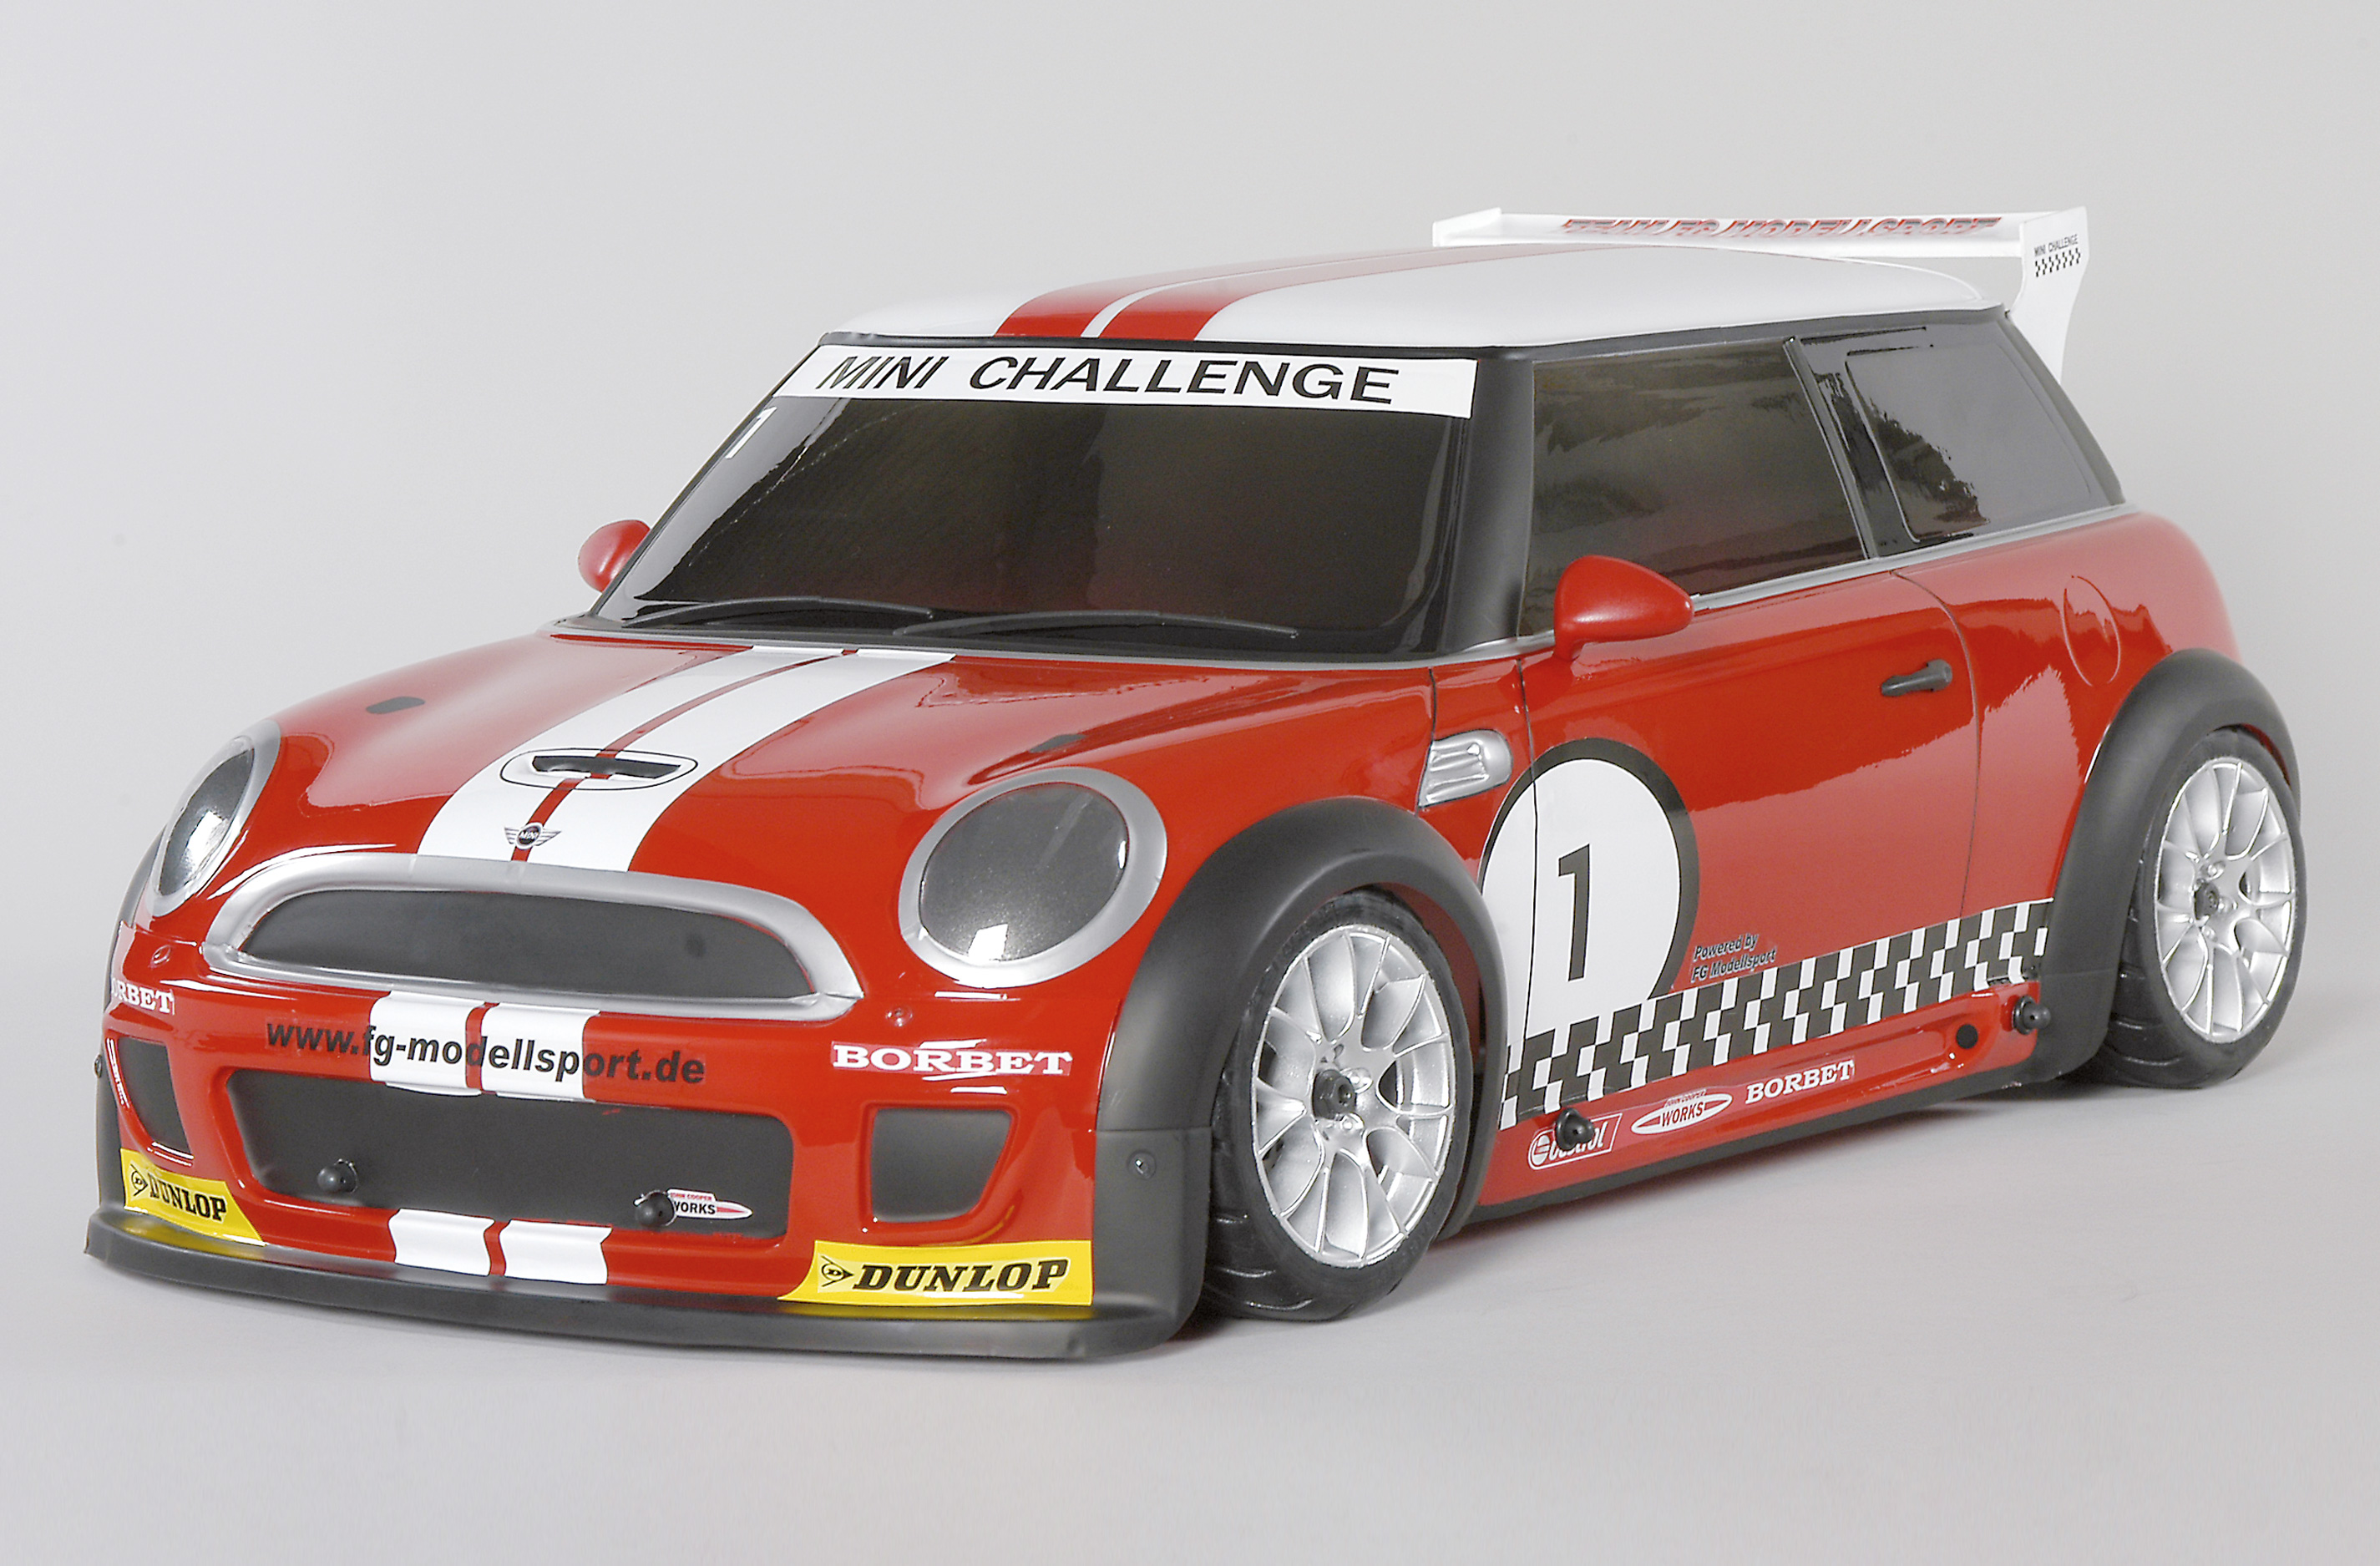 FG Sportsline with Mini Cooper body shell, 23cm³ Engine